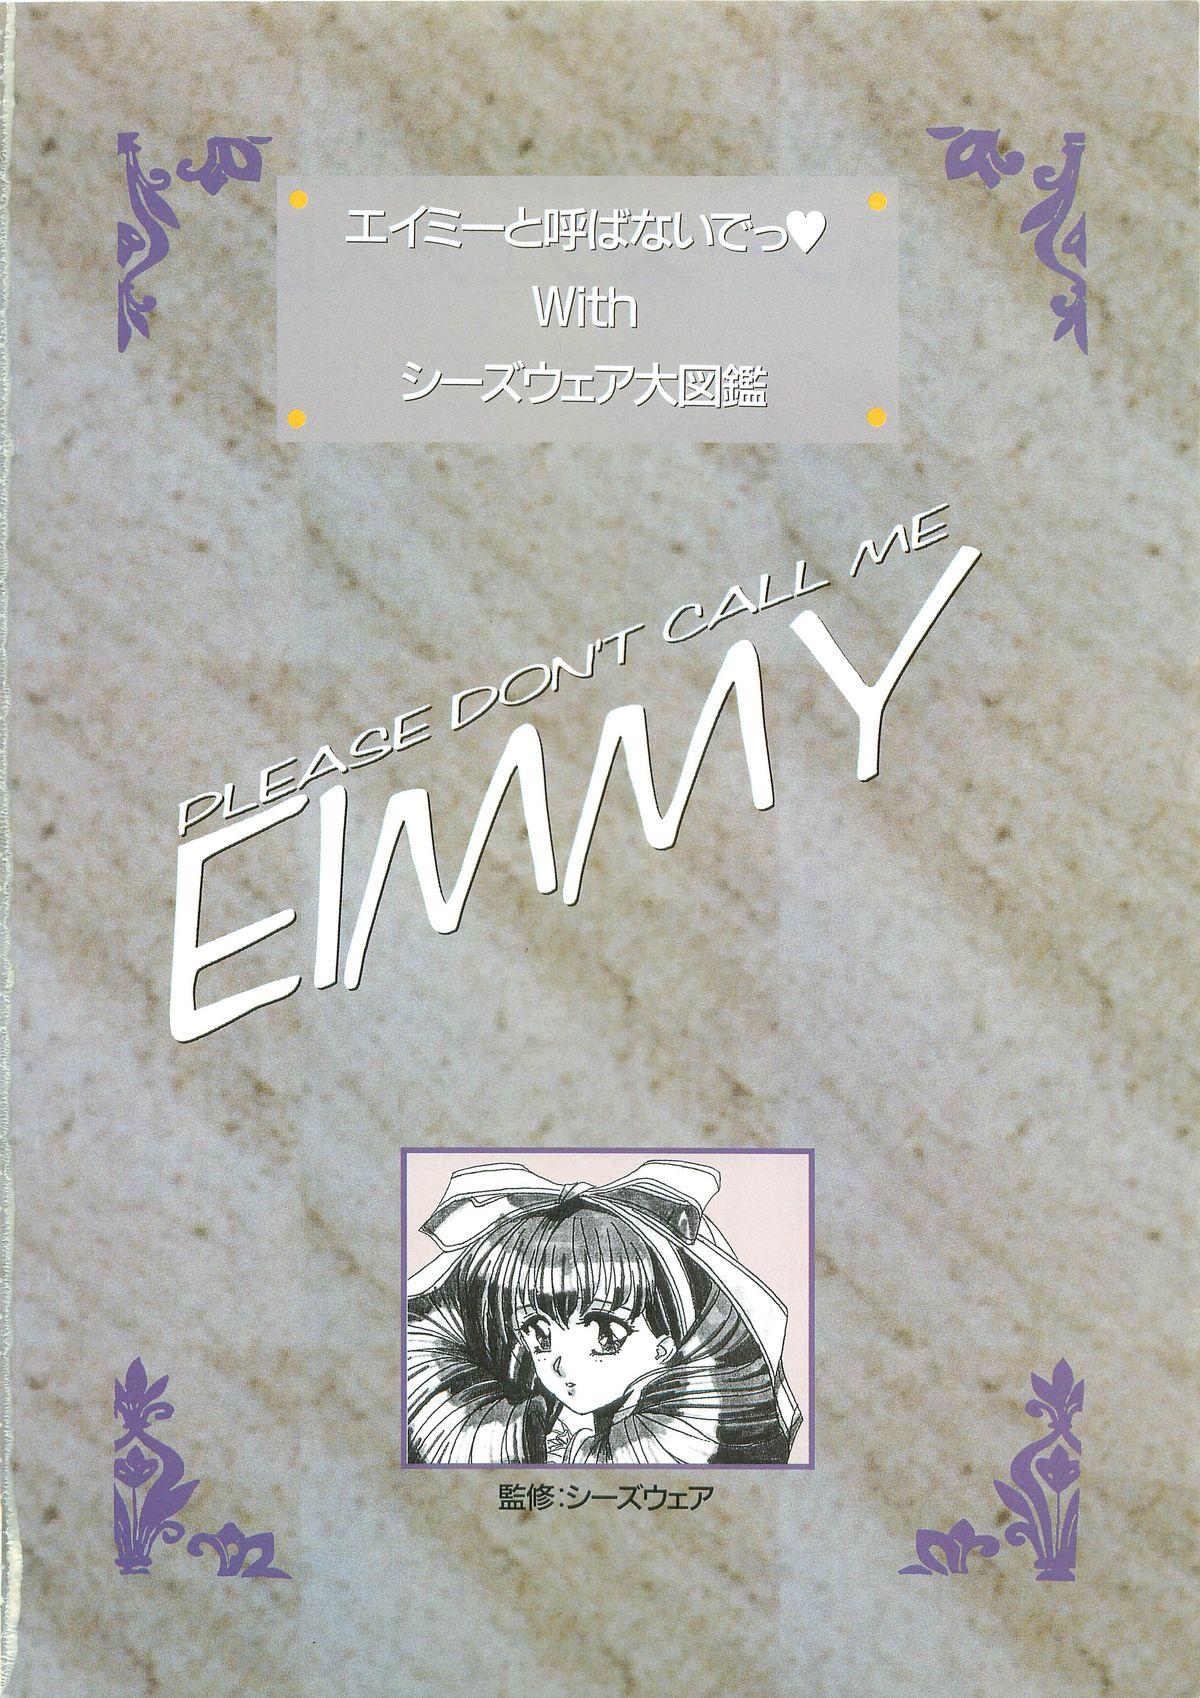 Please Don't Call me Eimmy with C's Ware encyclopedia 2